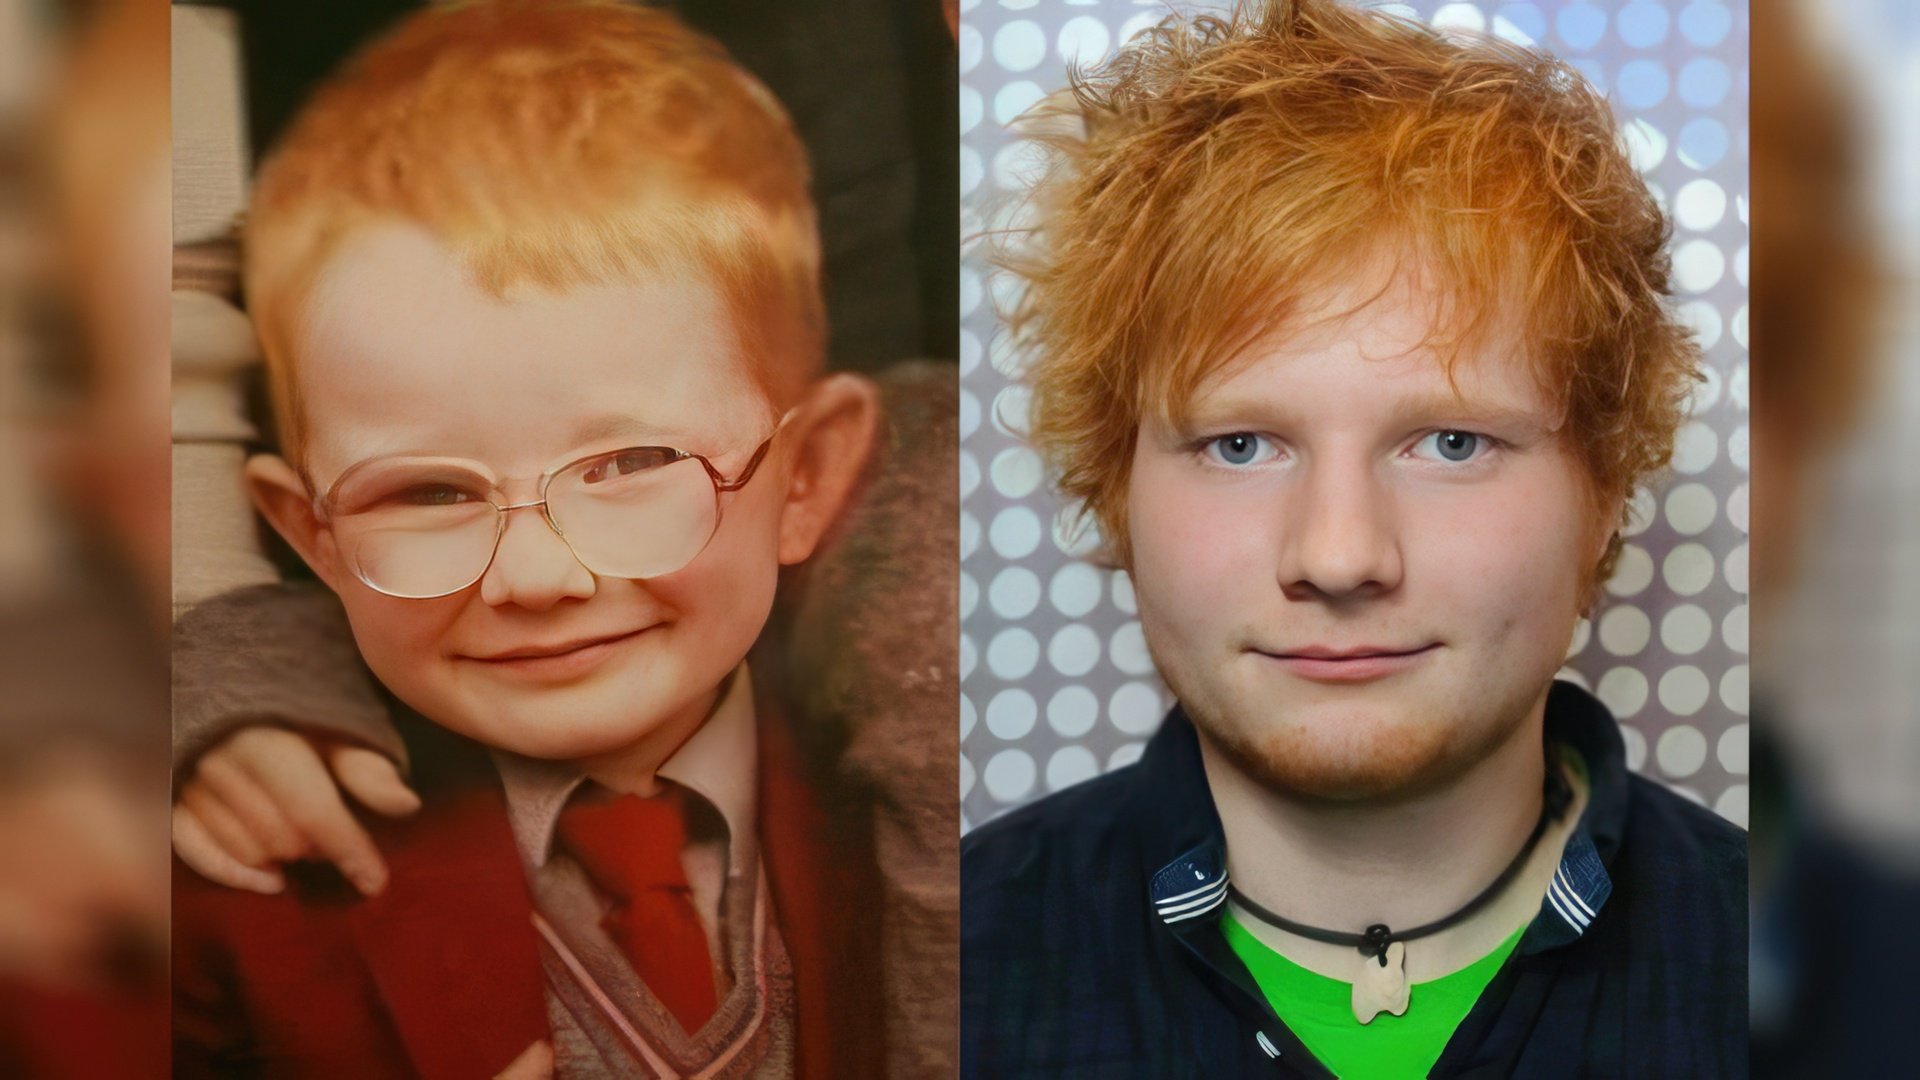 Ed Sheeran in Childhood and Now